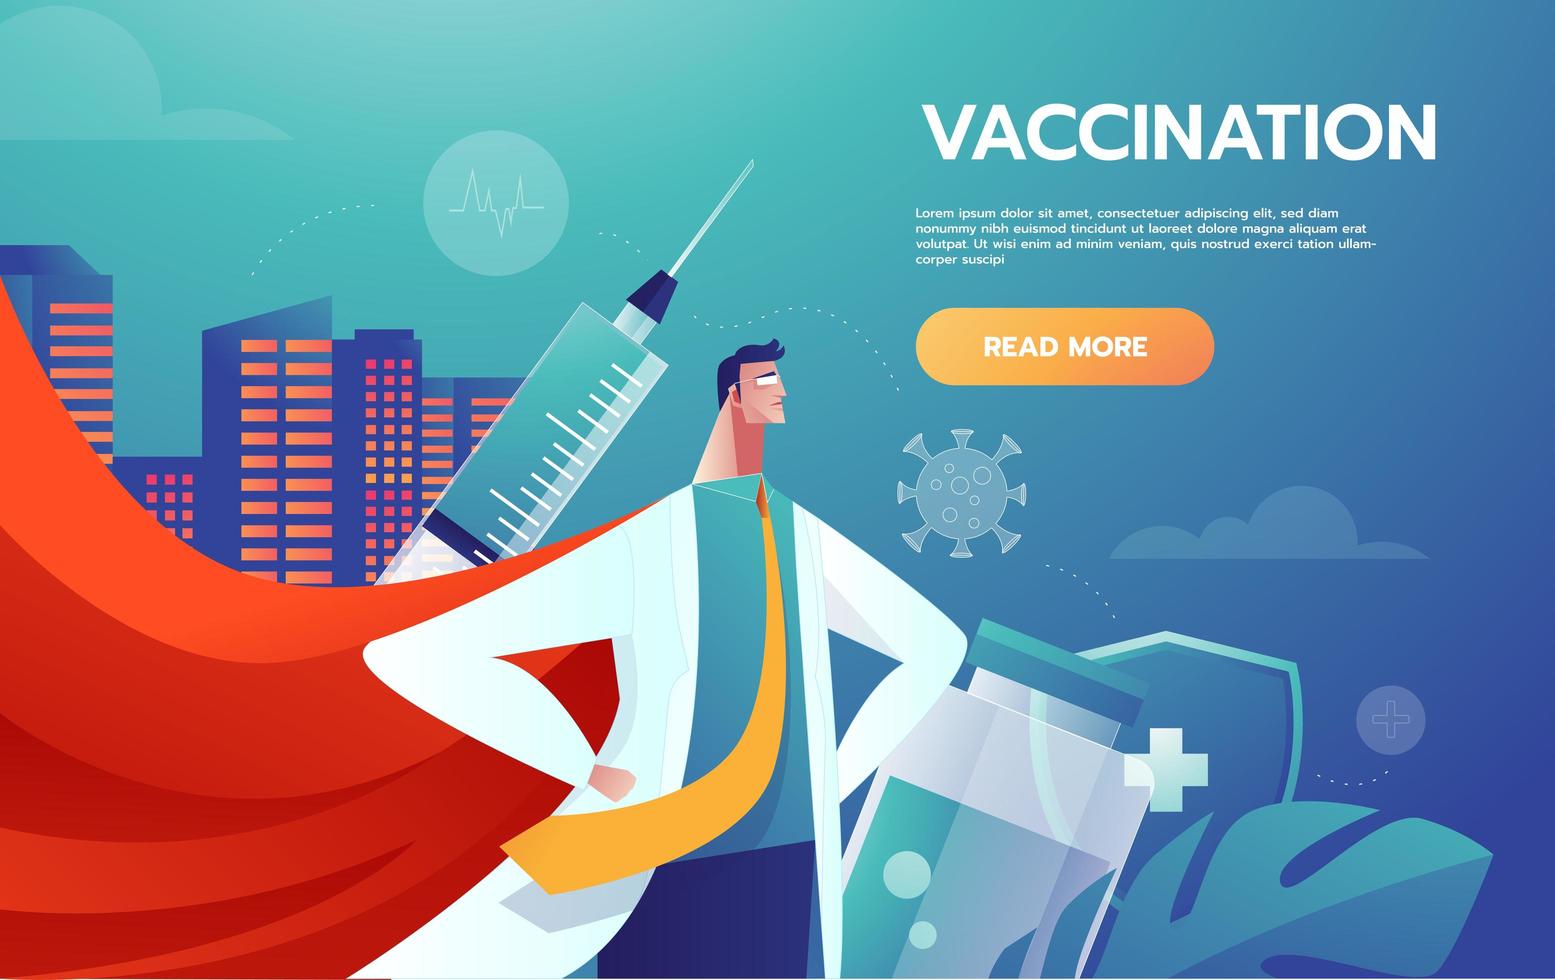 Doctor Hero in a Red Cloak Stands Vaccination Concept vector